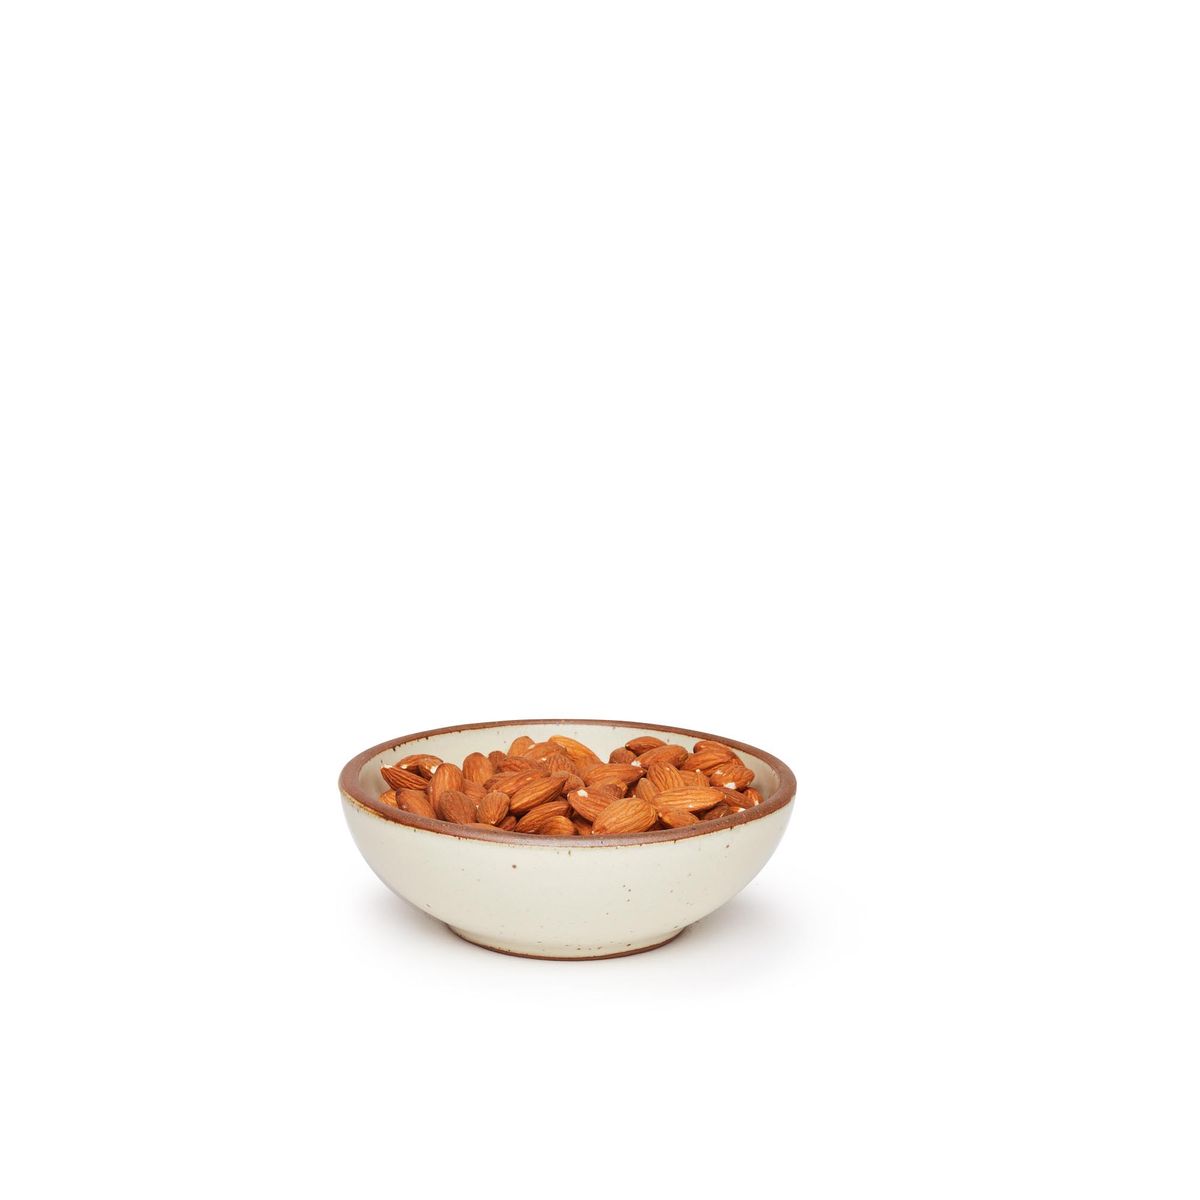 A small shallow ceramic bowl in a warm, tan-toned, off-white color featuring iron speckles and an unglazed rim, filled with almonds